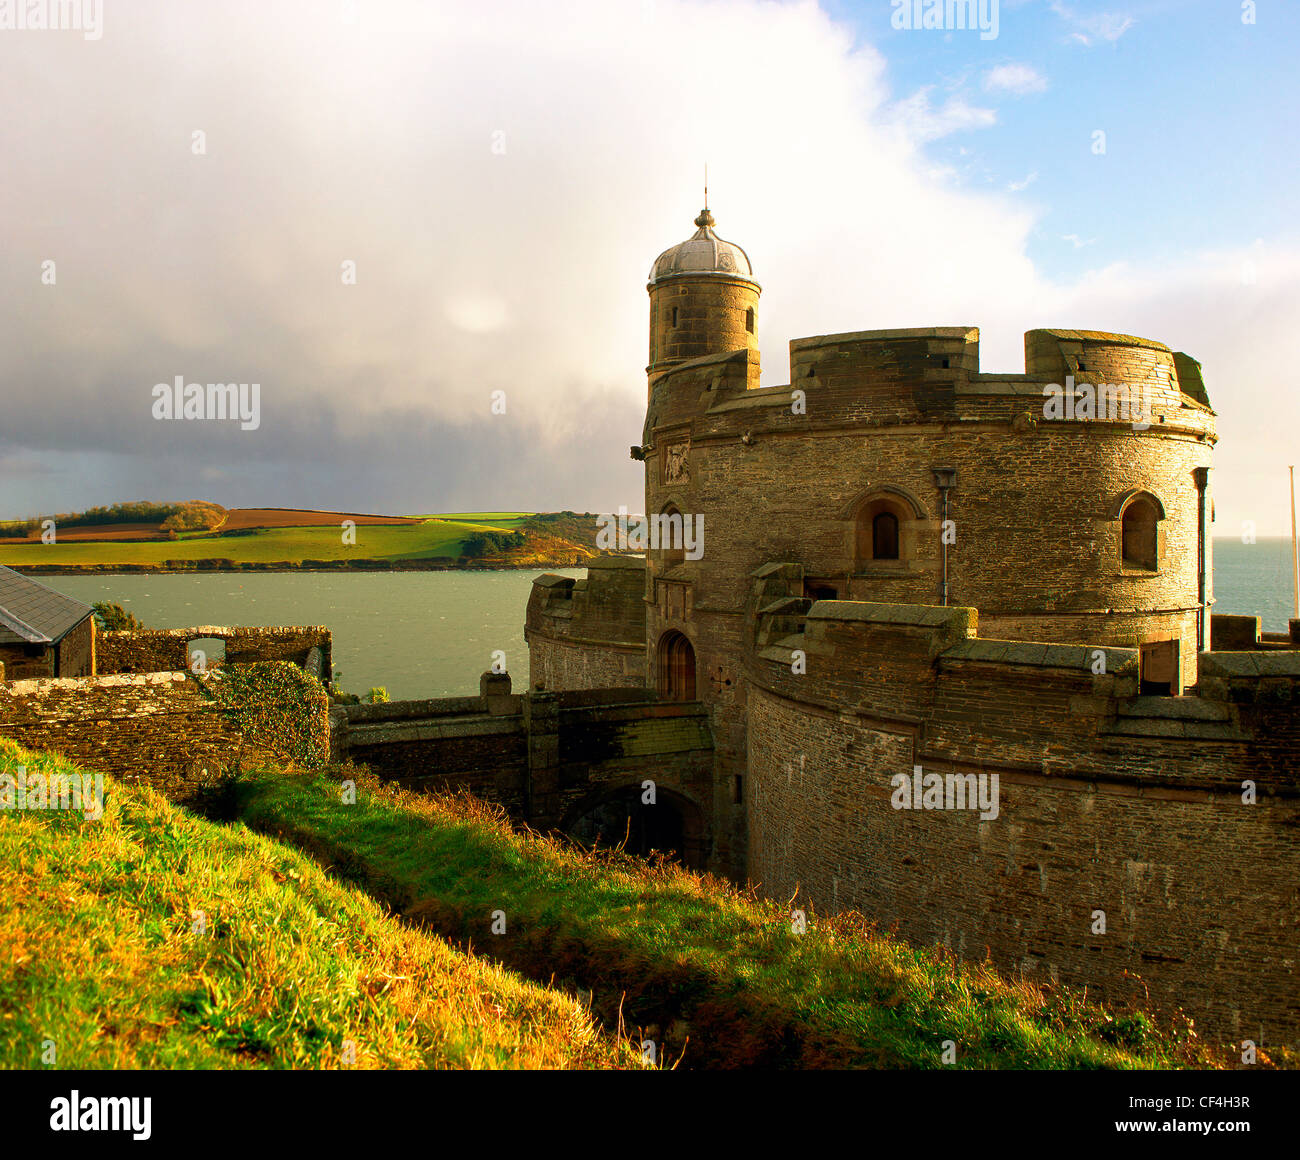 St Mawes Castle at the mouth of the Percuil River on the Roseland Peninsula, built by Henry Vlll to defend the town against inva Stock Photo